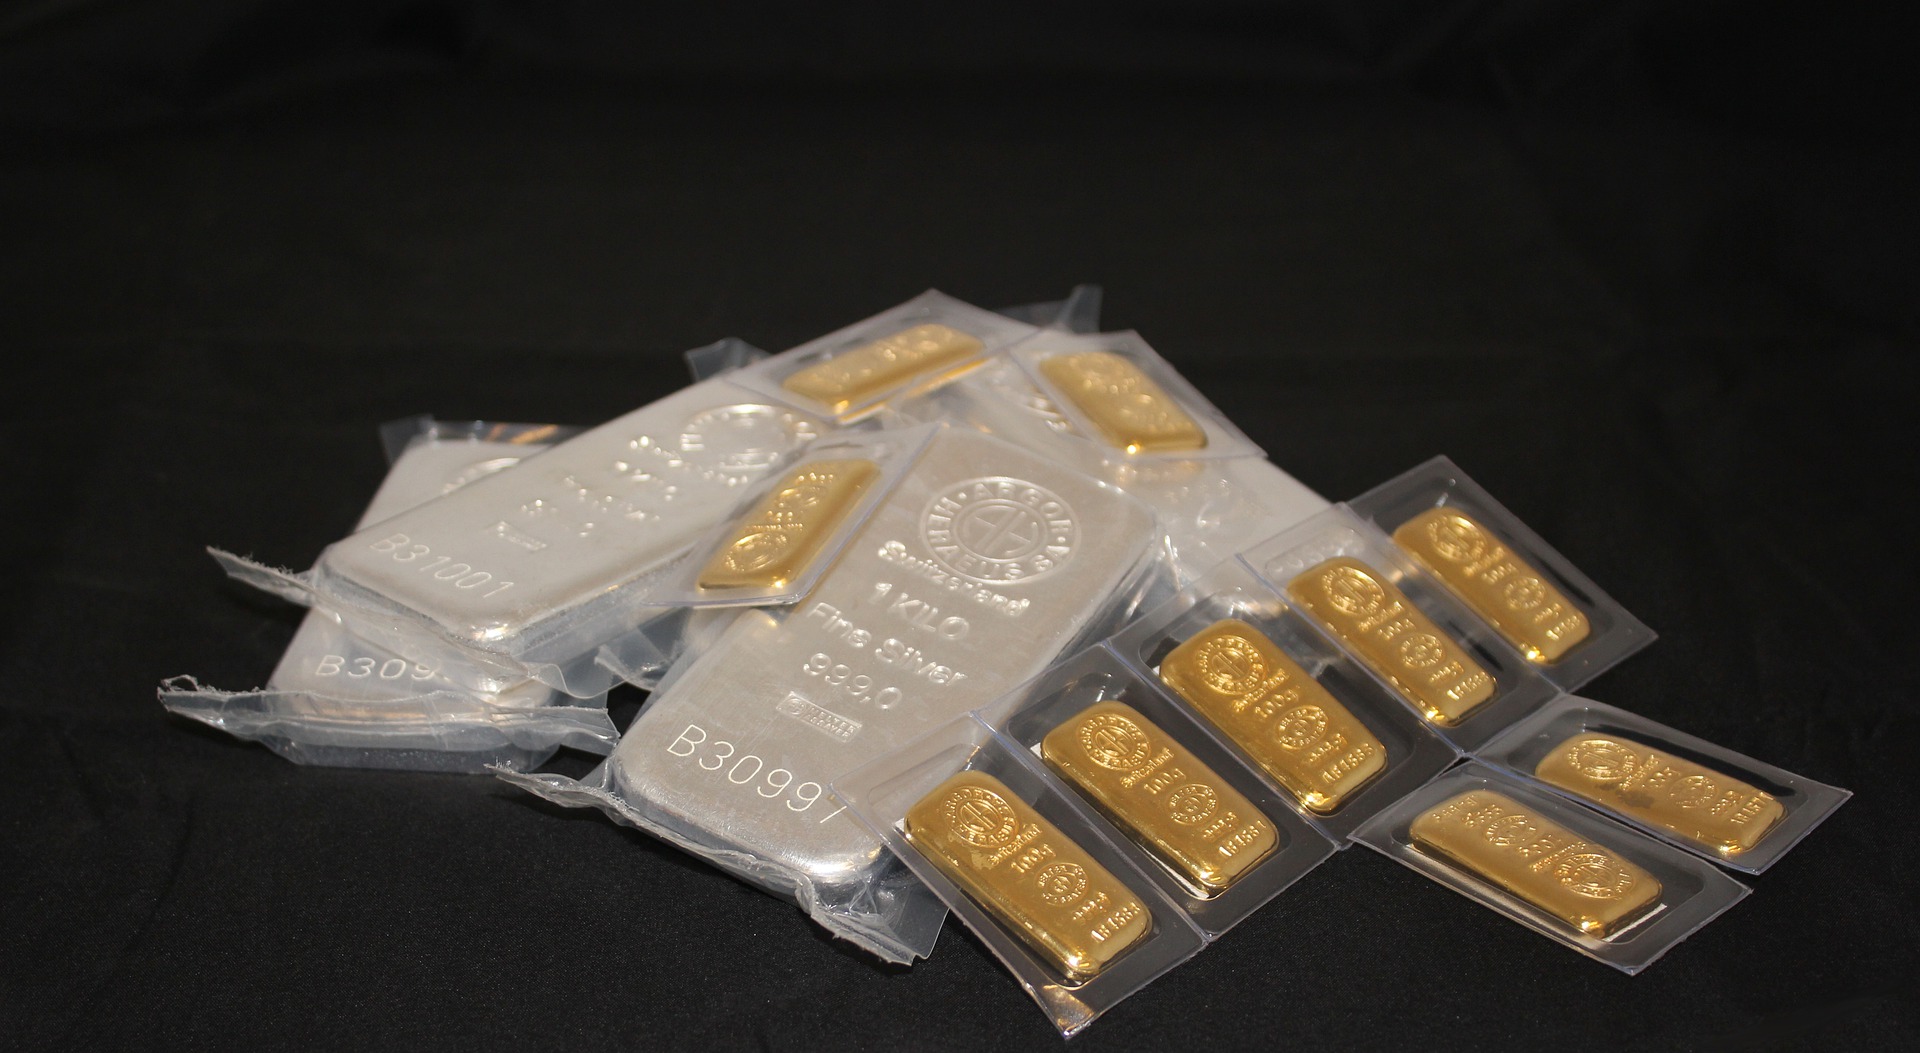 Gold and silver bars lying next to and on top of each other